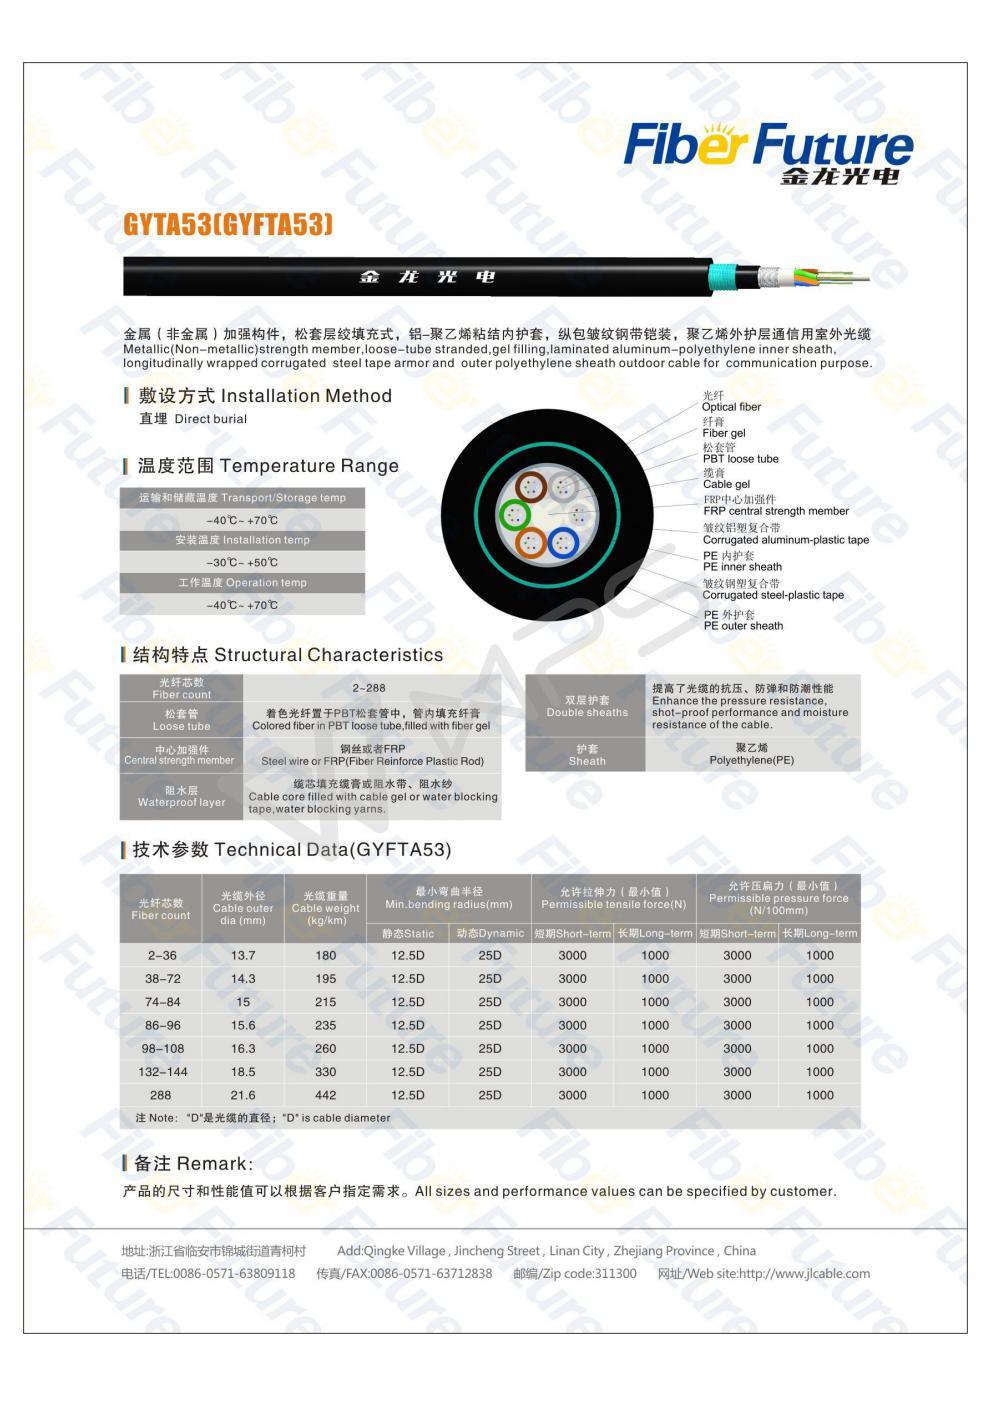 GYTA53 Duct & Direct Burial Outerdoor Optical Fiber Cable